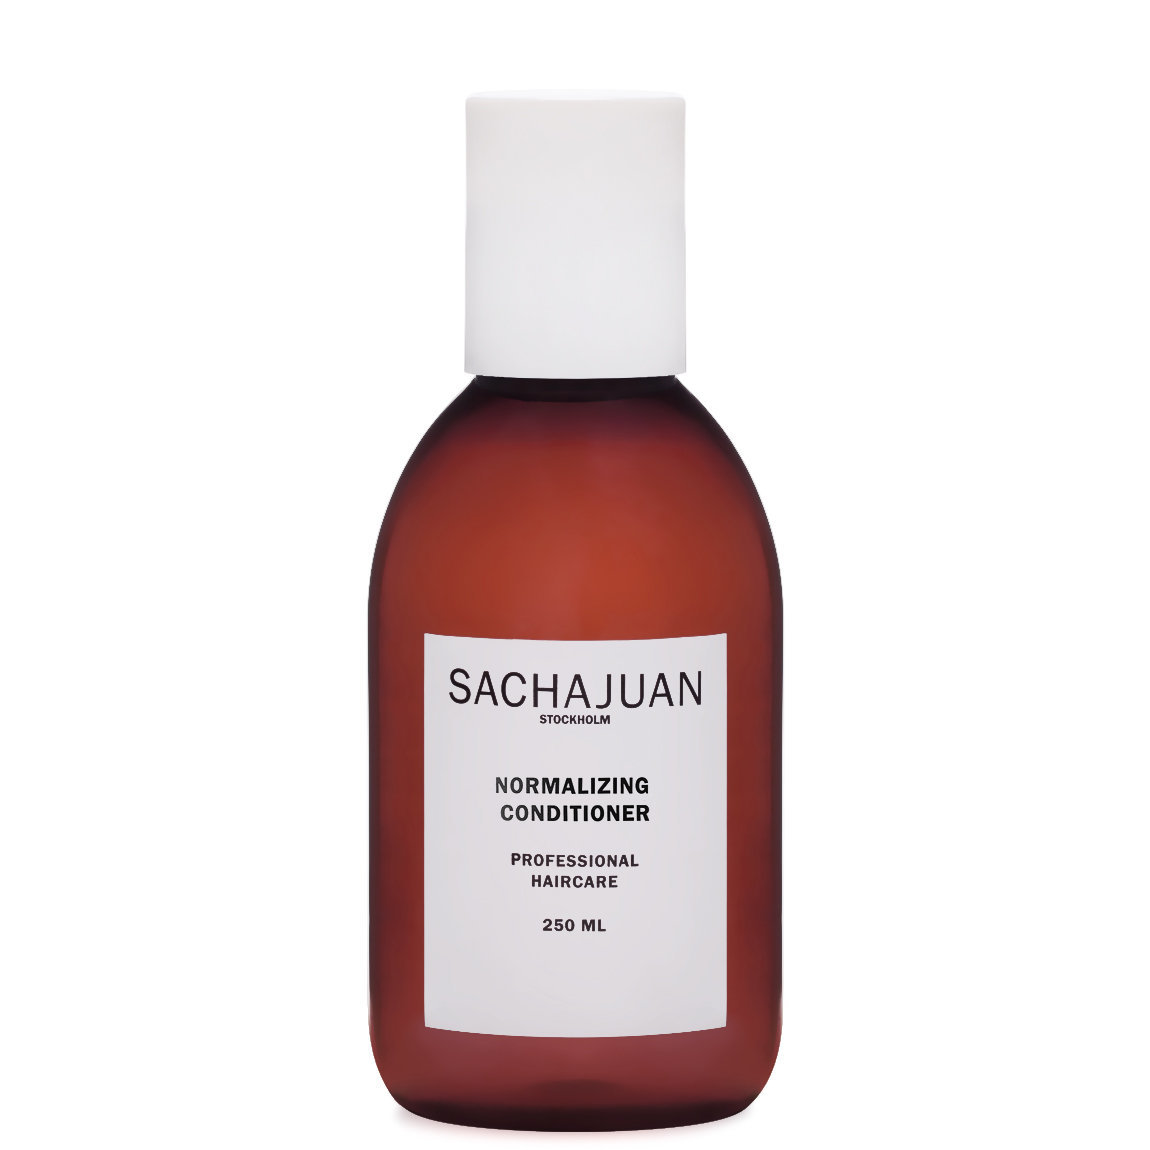 SACHAJUAN Normalizing Conditioner alternative view 1 - product swatch.